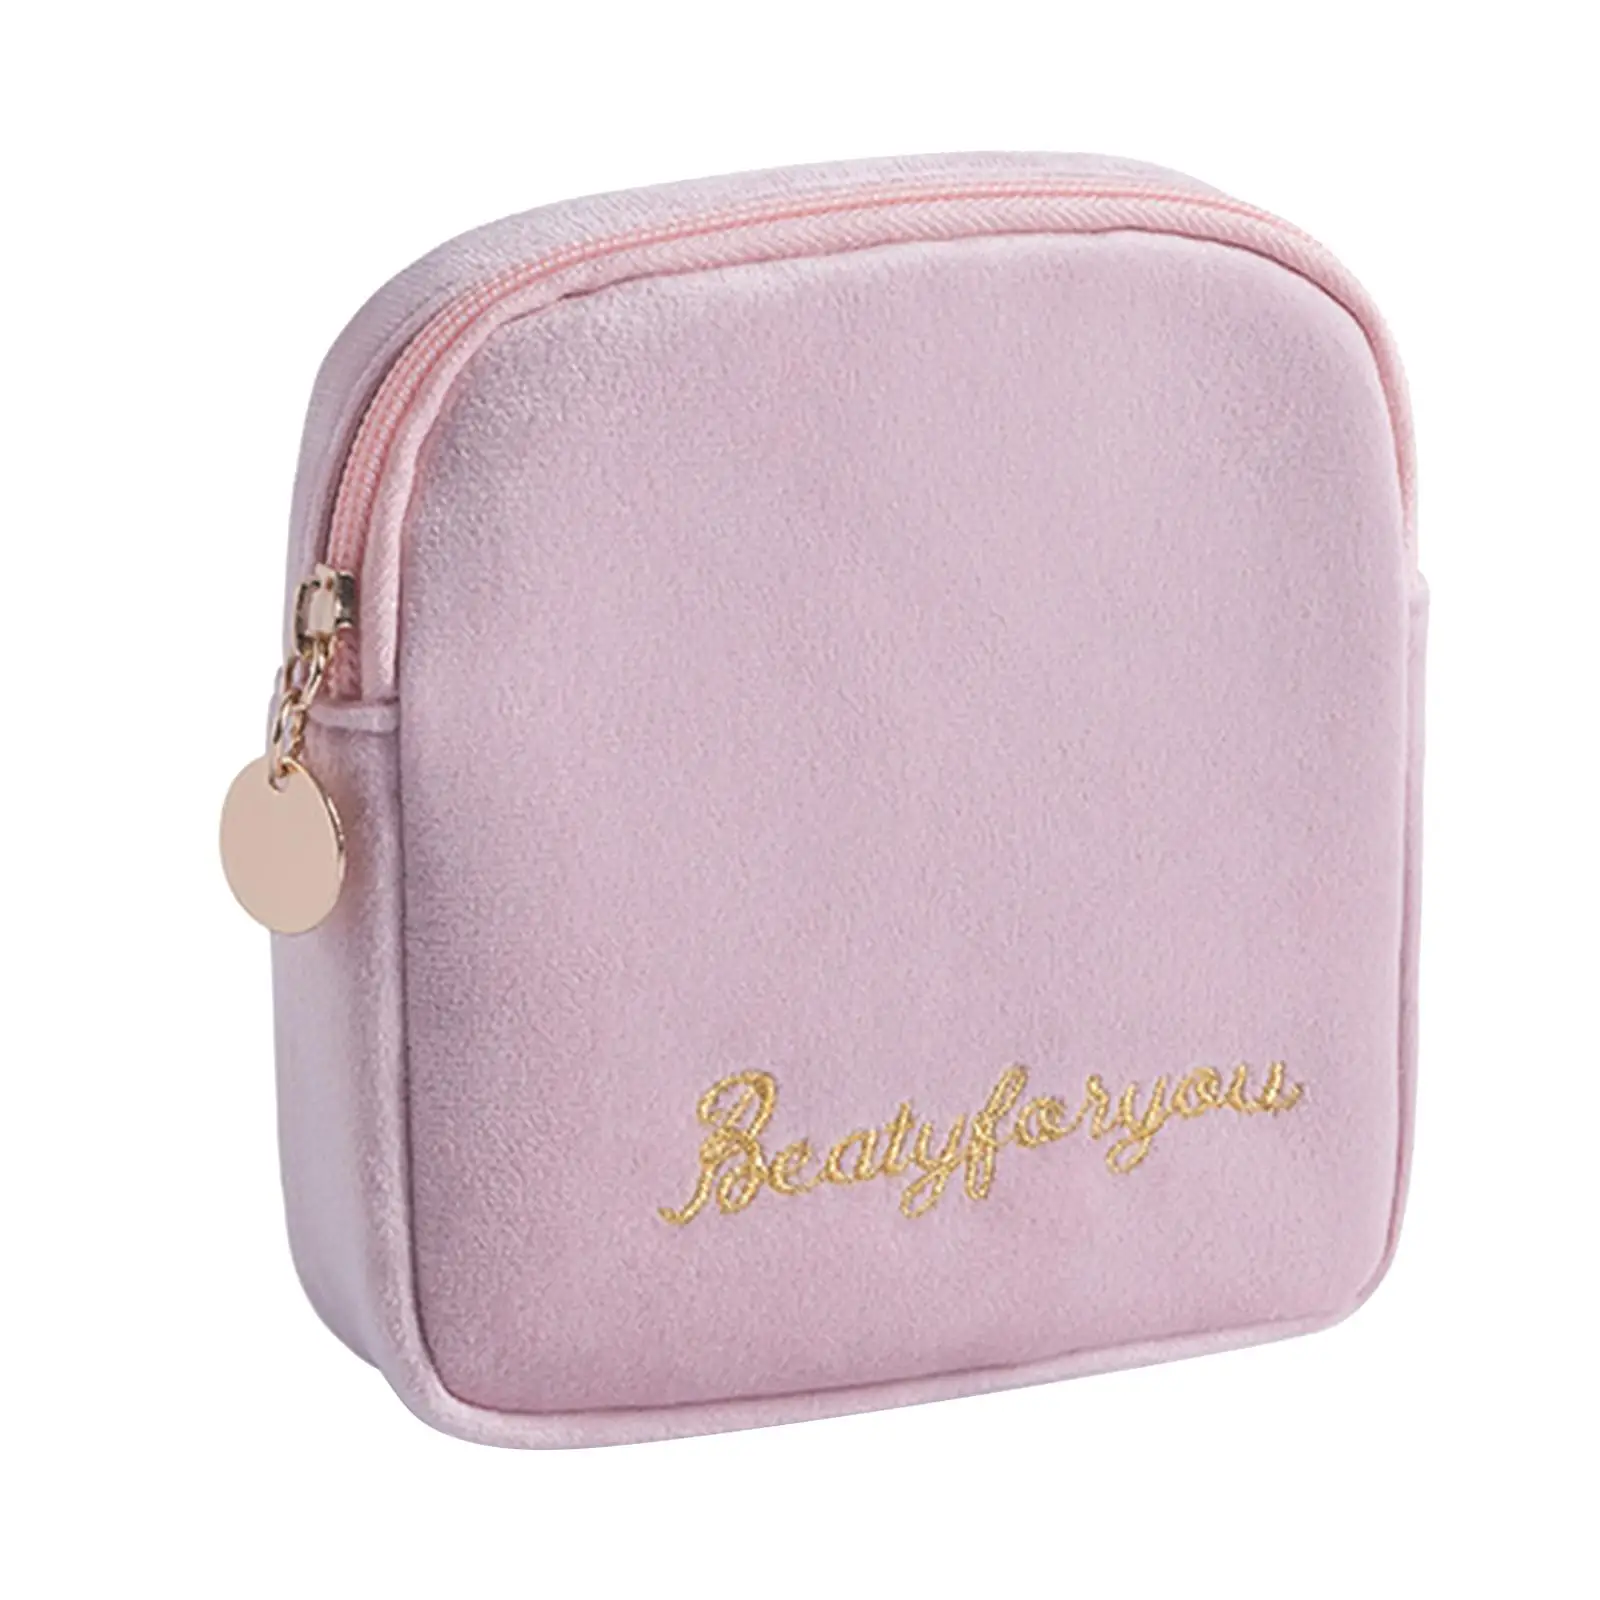 Reusable Sanitary Napkin Pads Storage Bag with Zipper Accessory Easy to Use Flocking Pouch Period Bag for Ladies